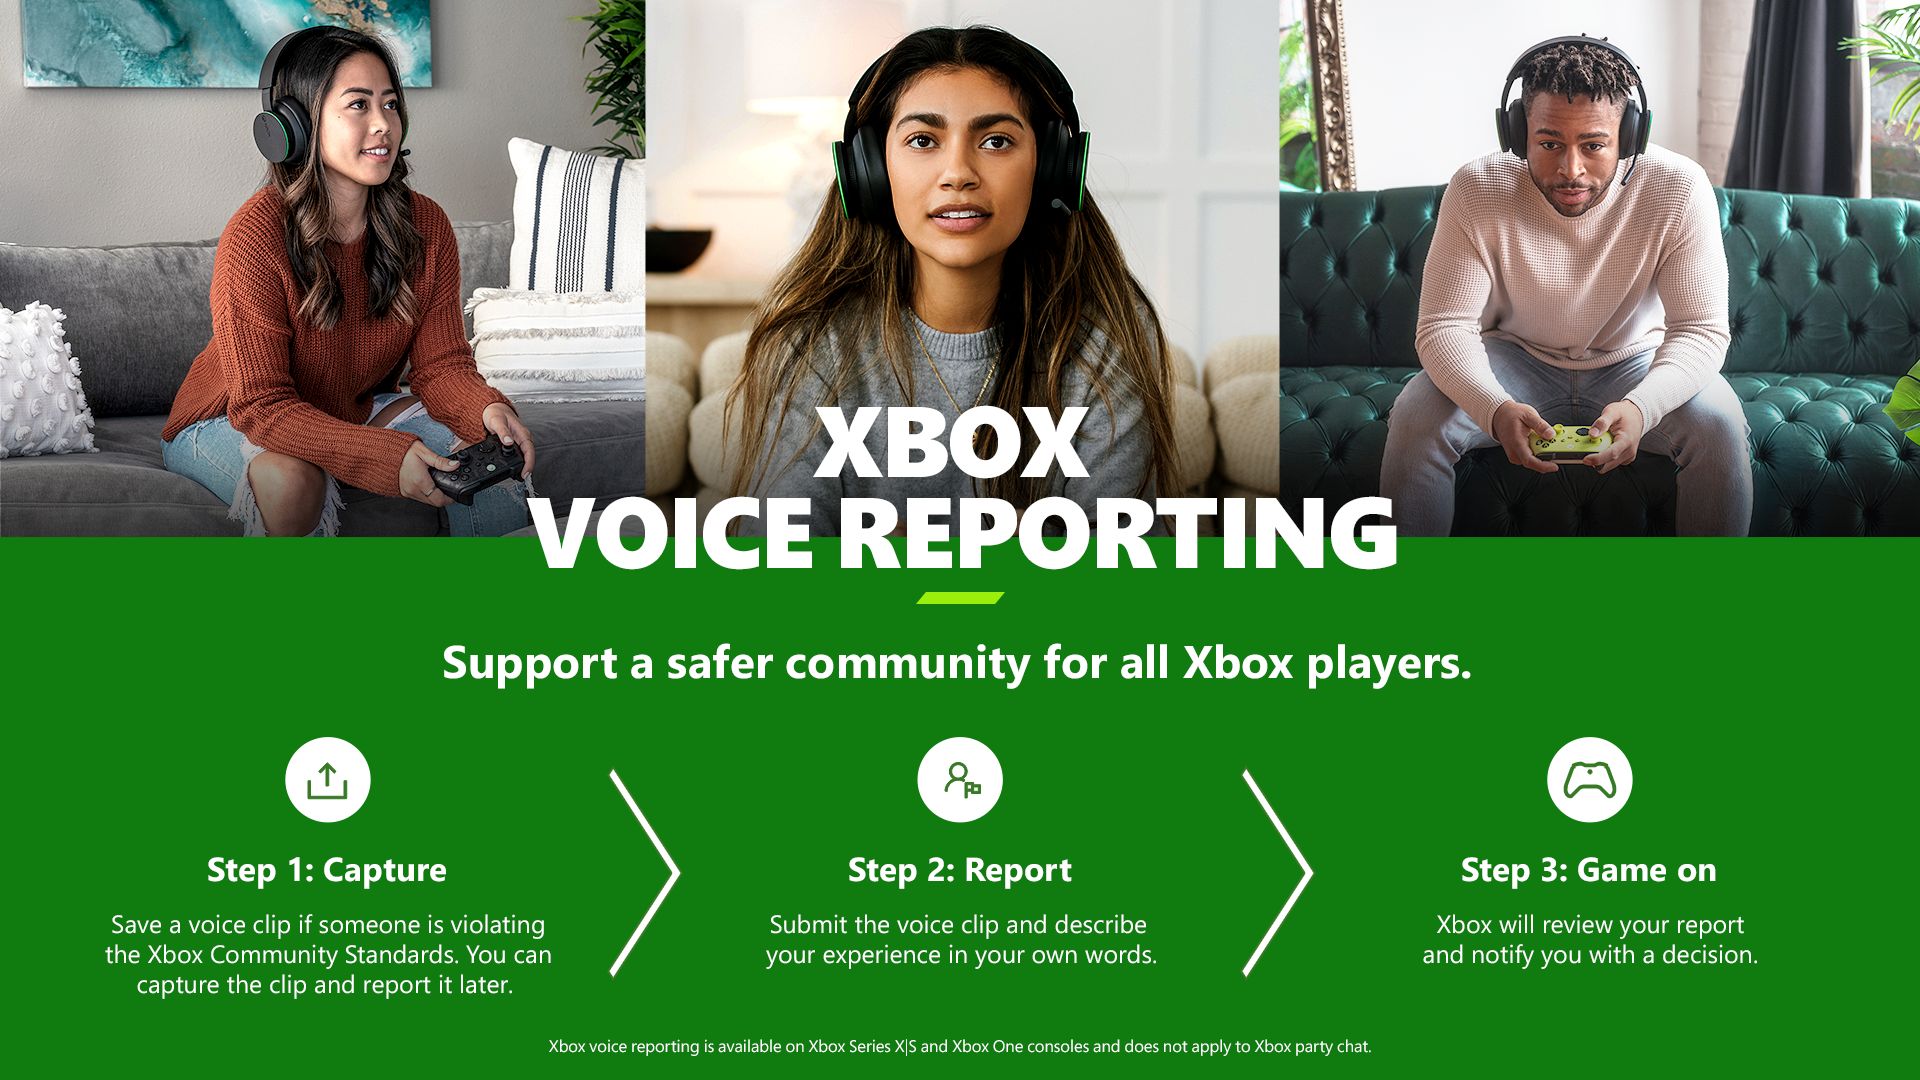 Microsoft's new Xbox TV app streams games without a console later